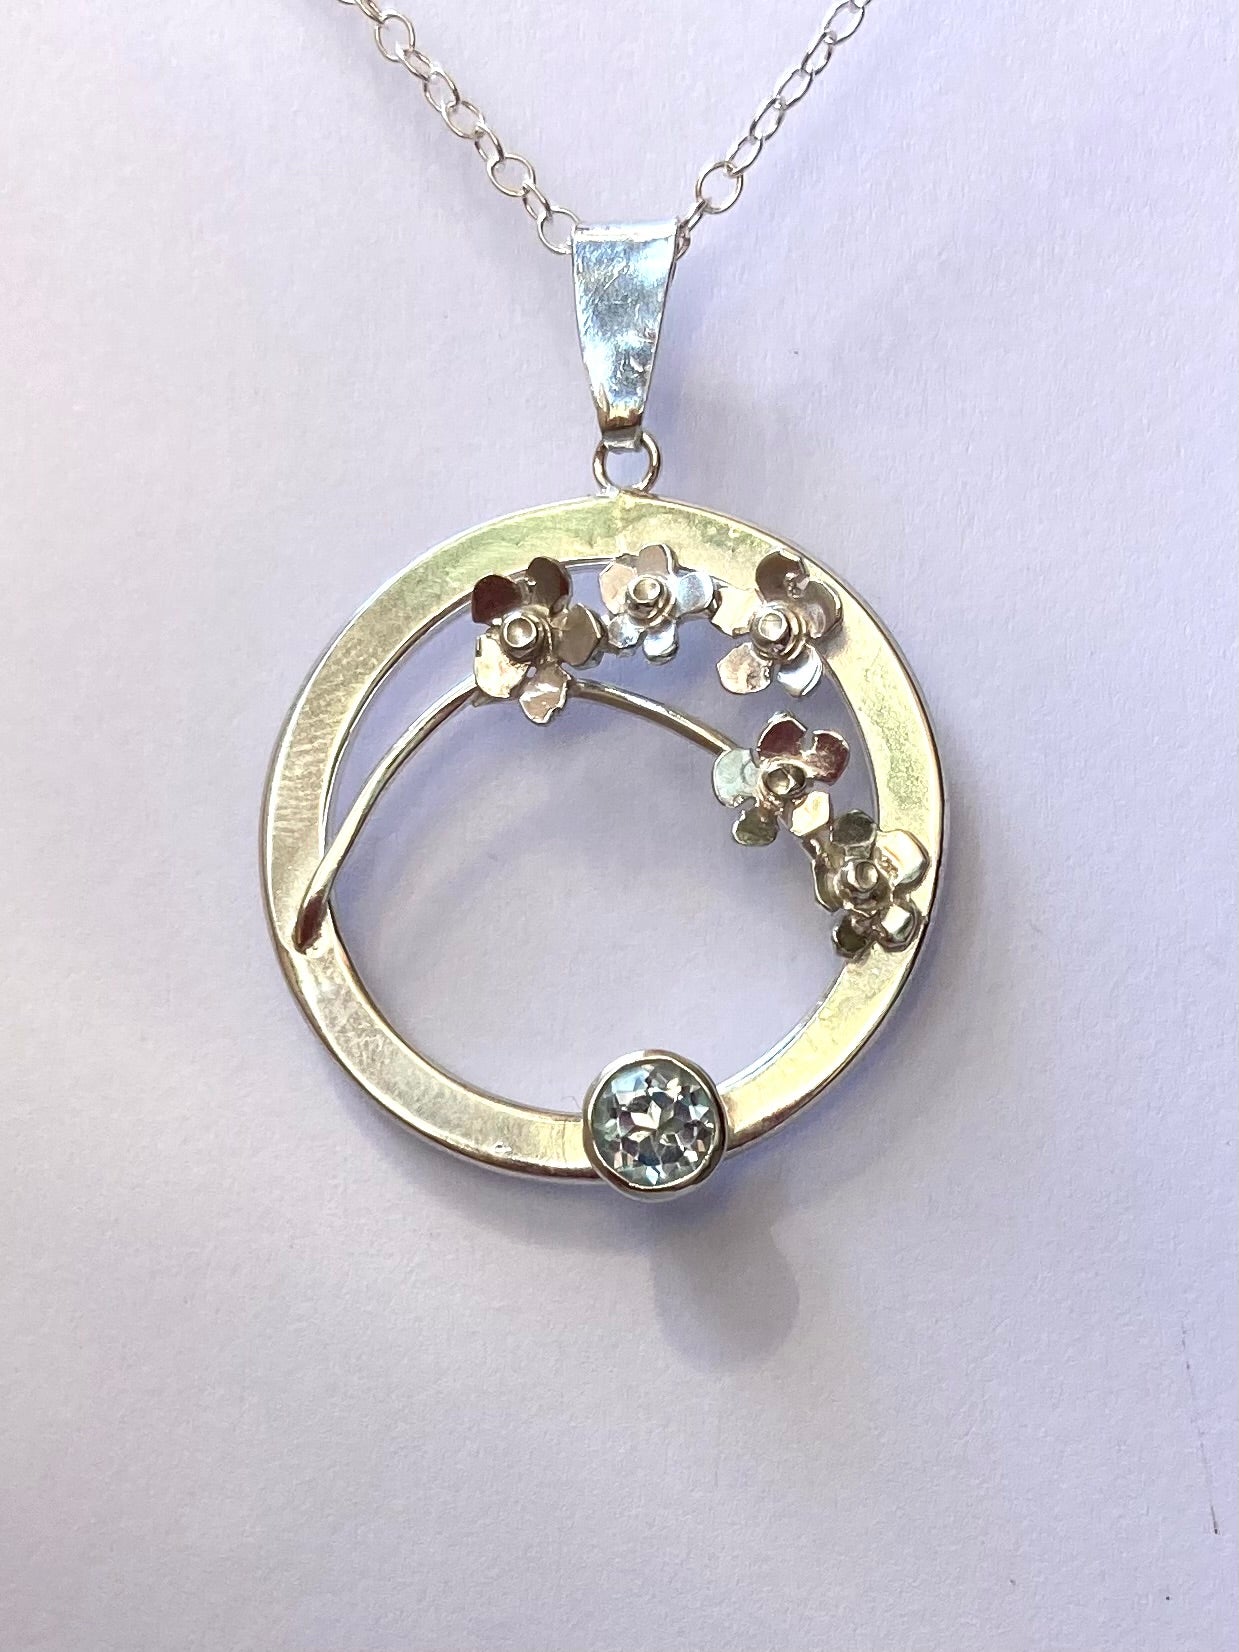 Forget-me-Not floral pendant set with blue topaz